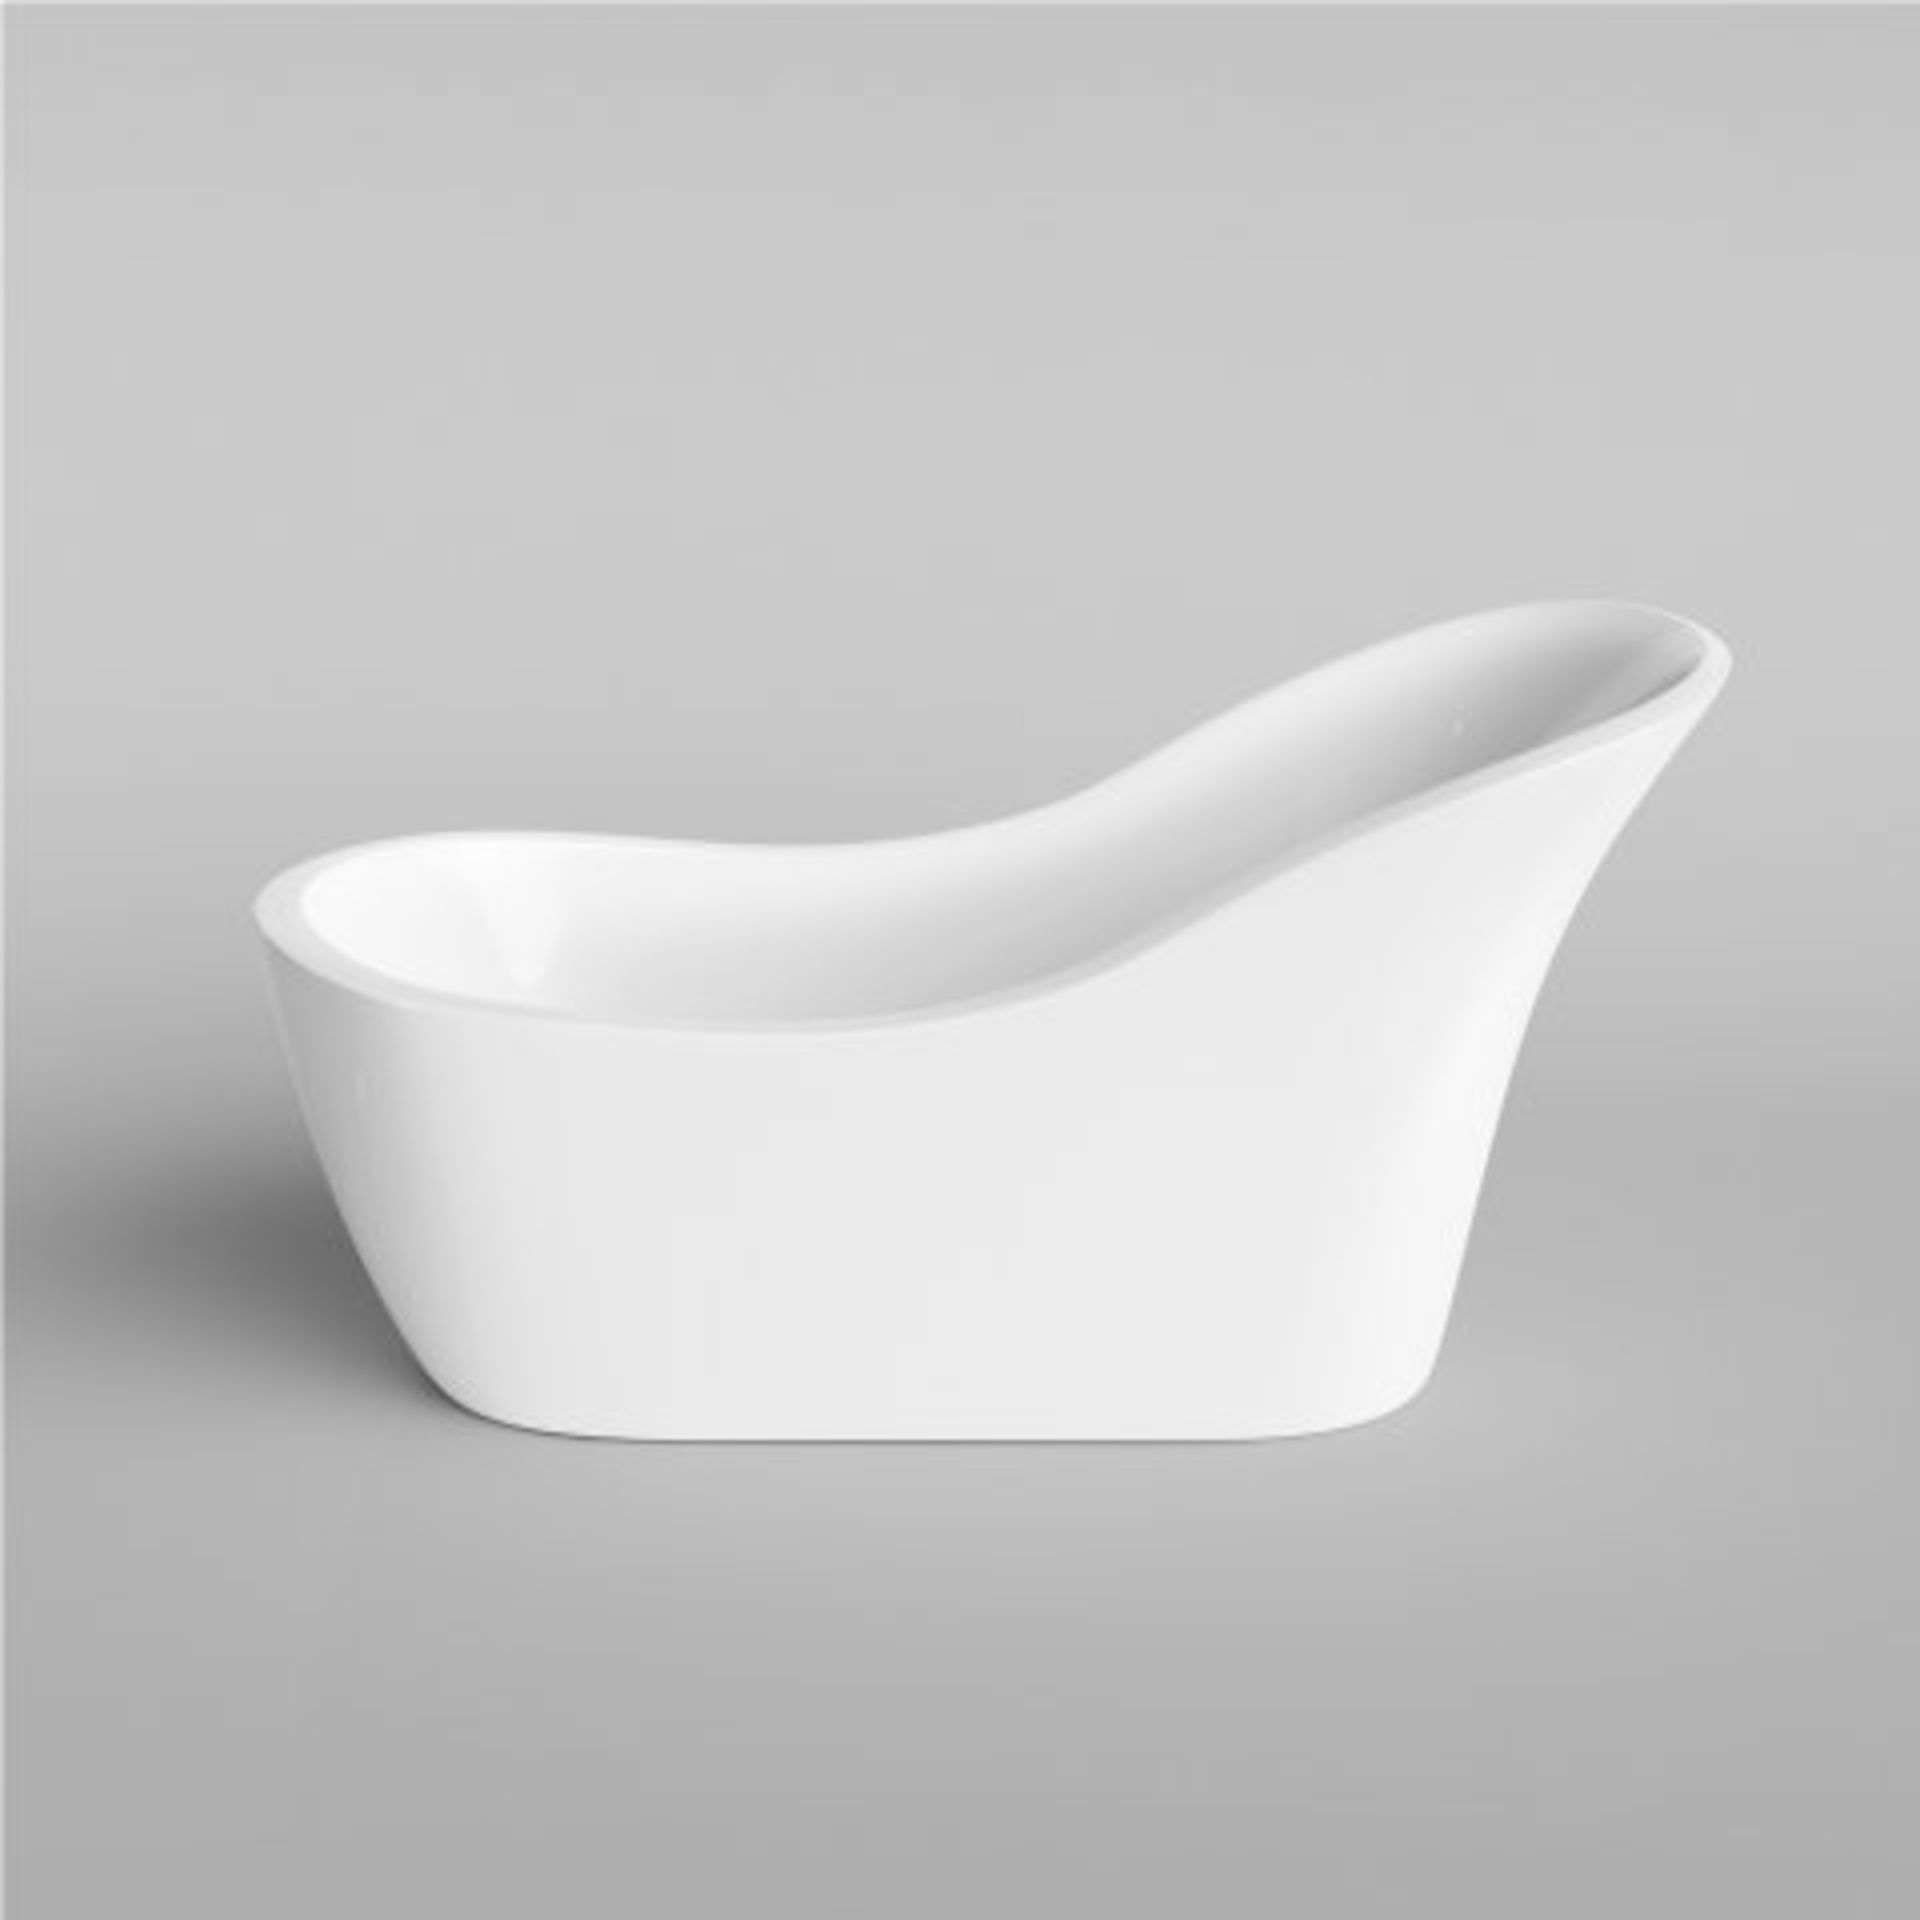 NEW & BOXED 1730x720MM Eve Freestanding Bath. RRP £2,499.BR264.This gloss white free-standing... - Image 3 of 3